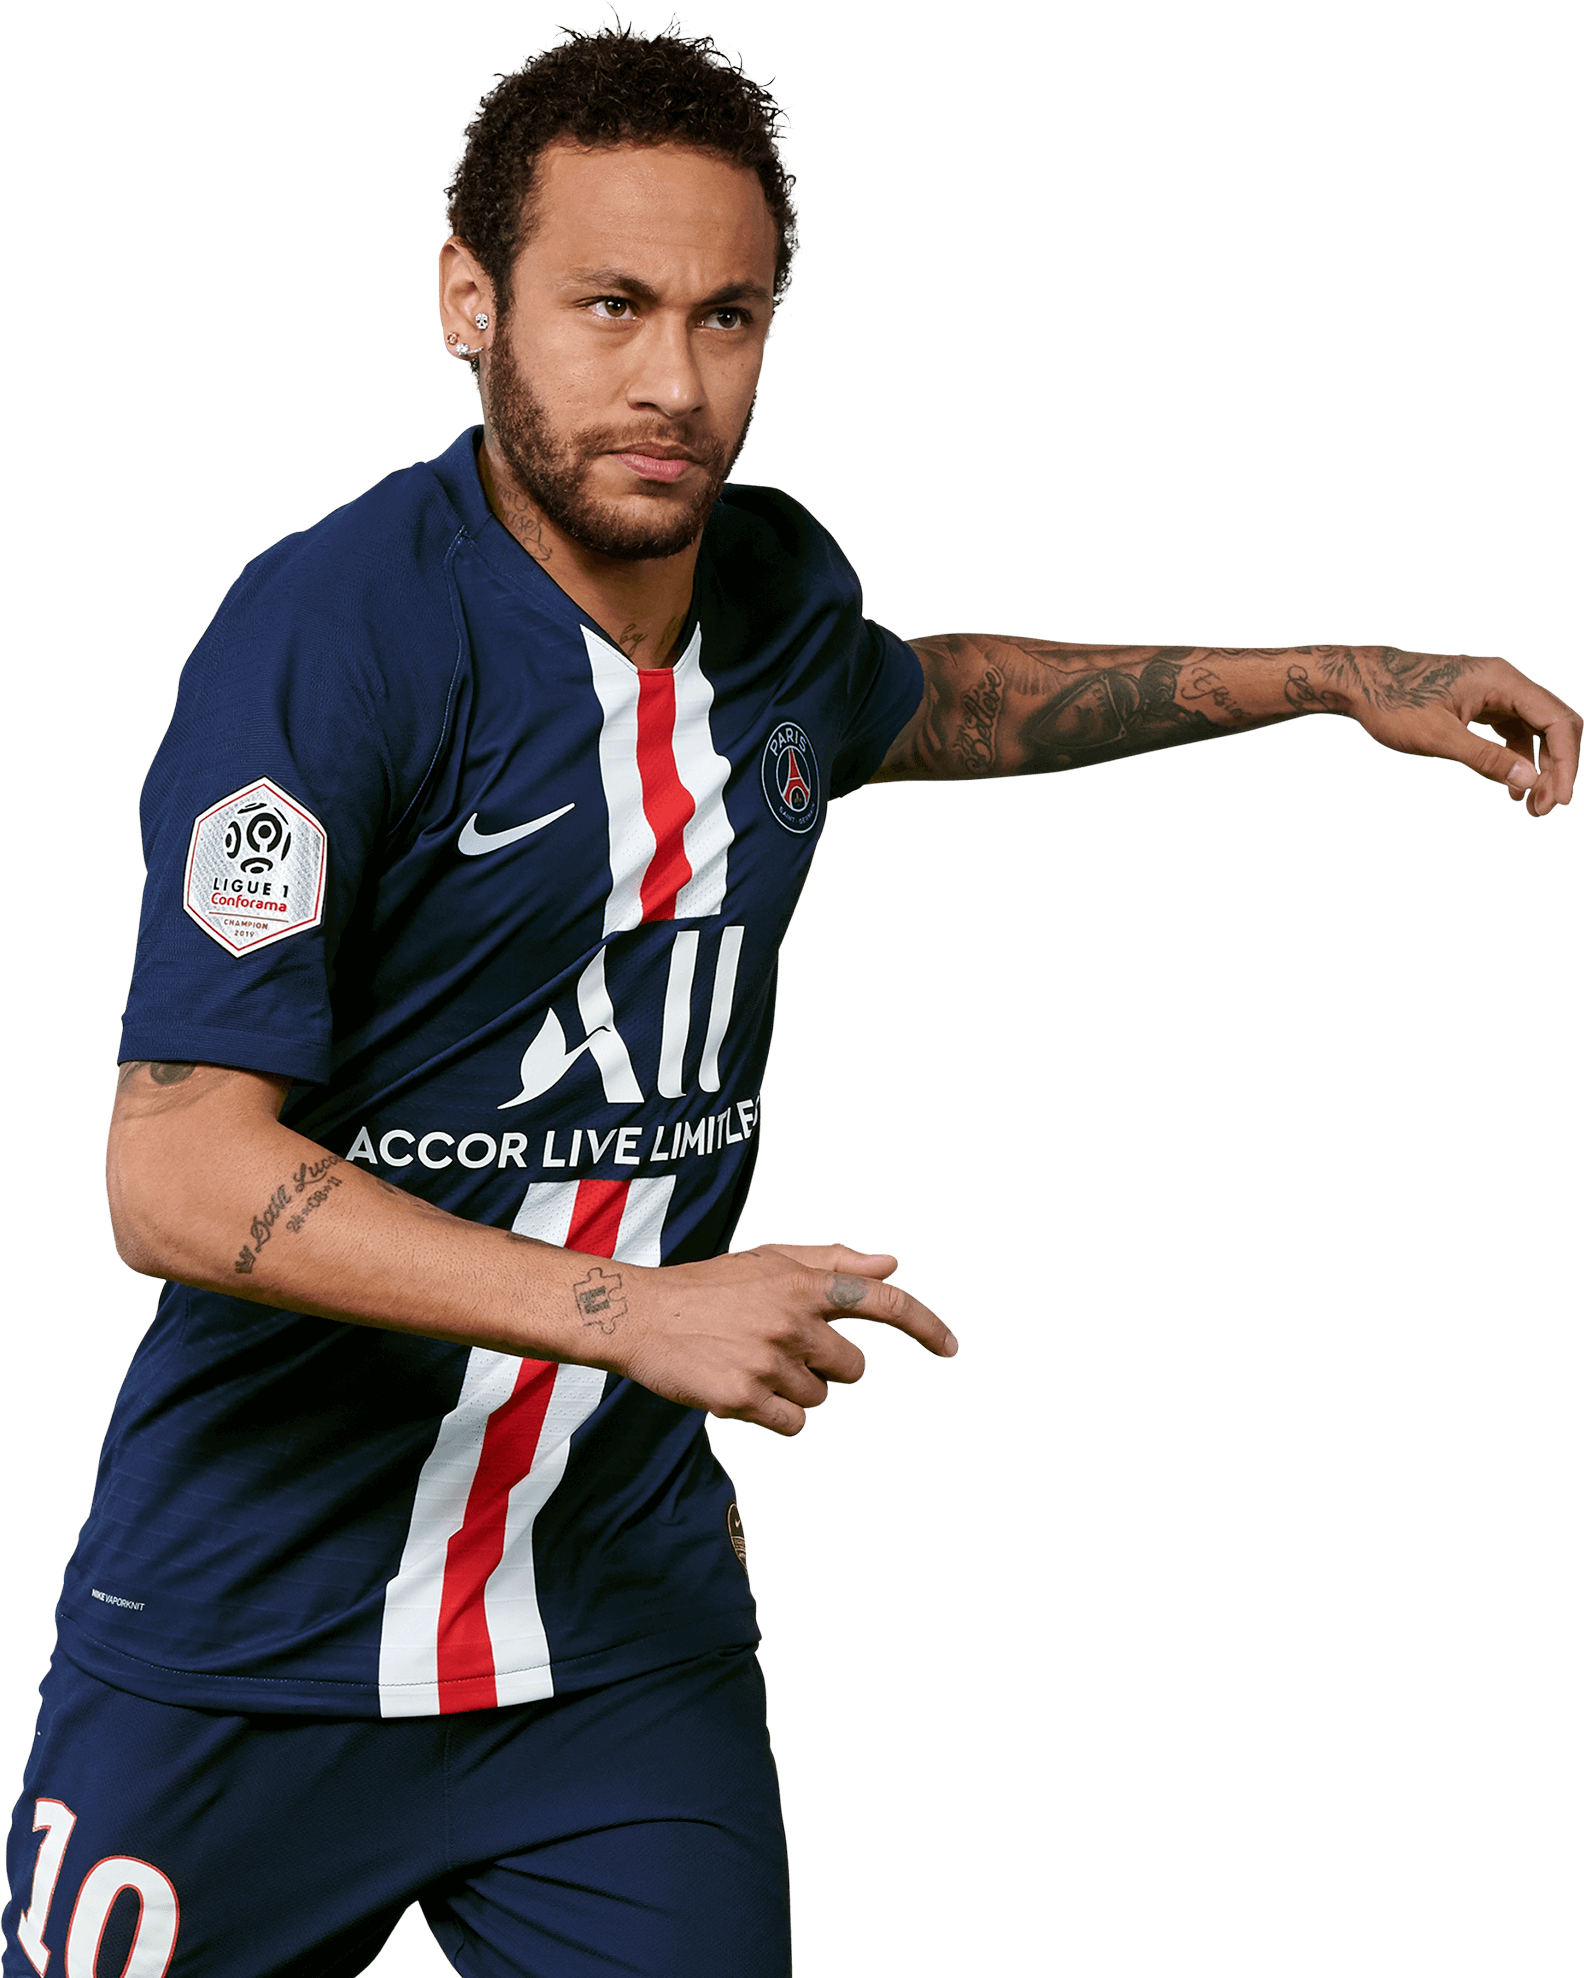 Ready to score with Neymar image transparent